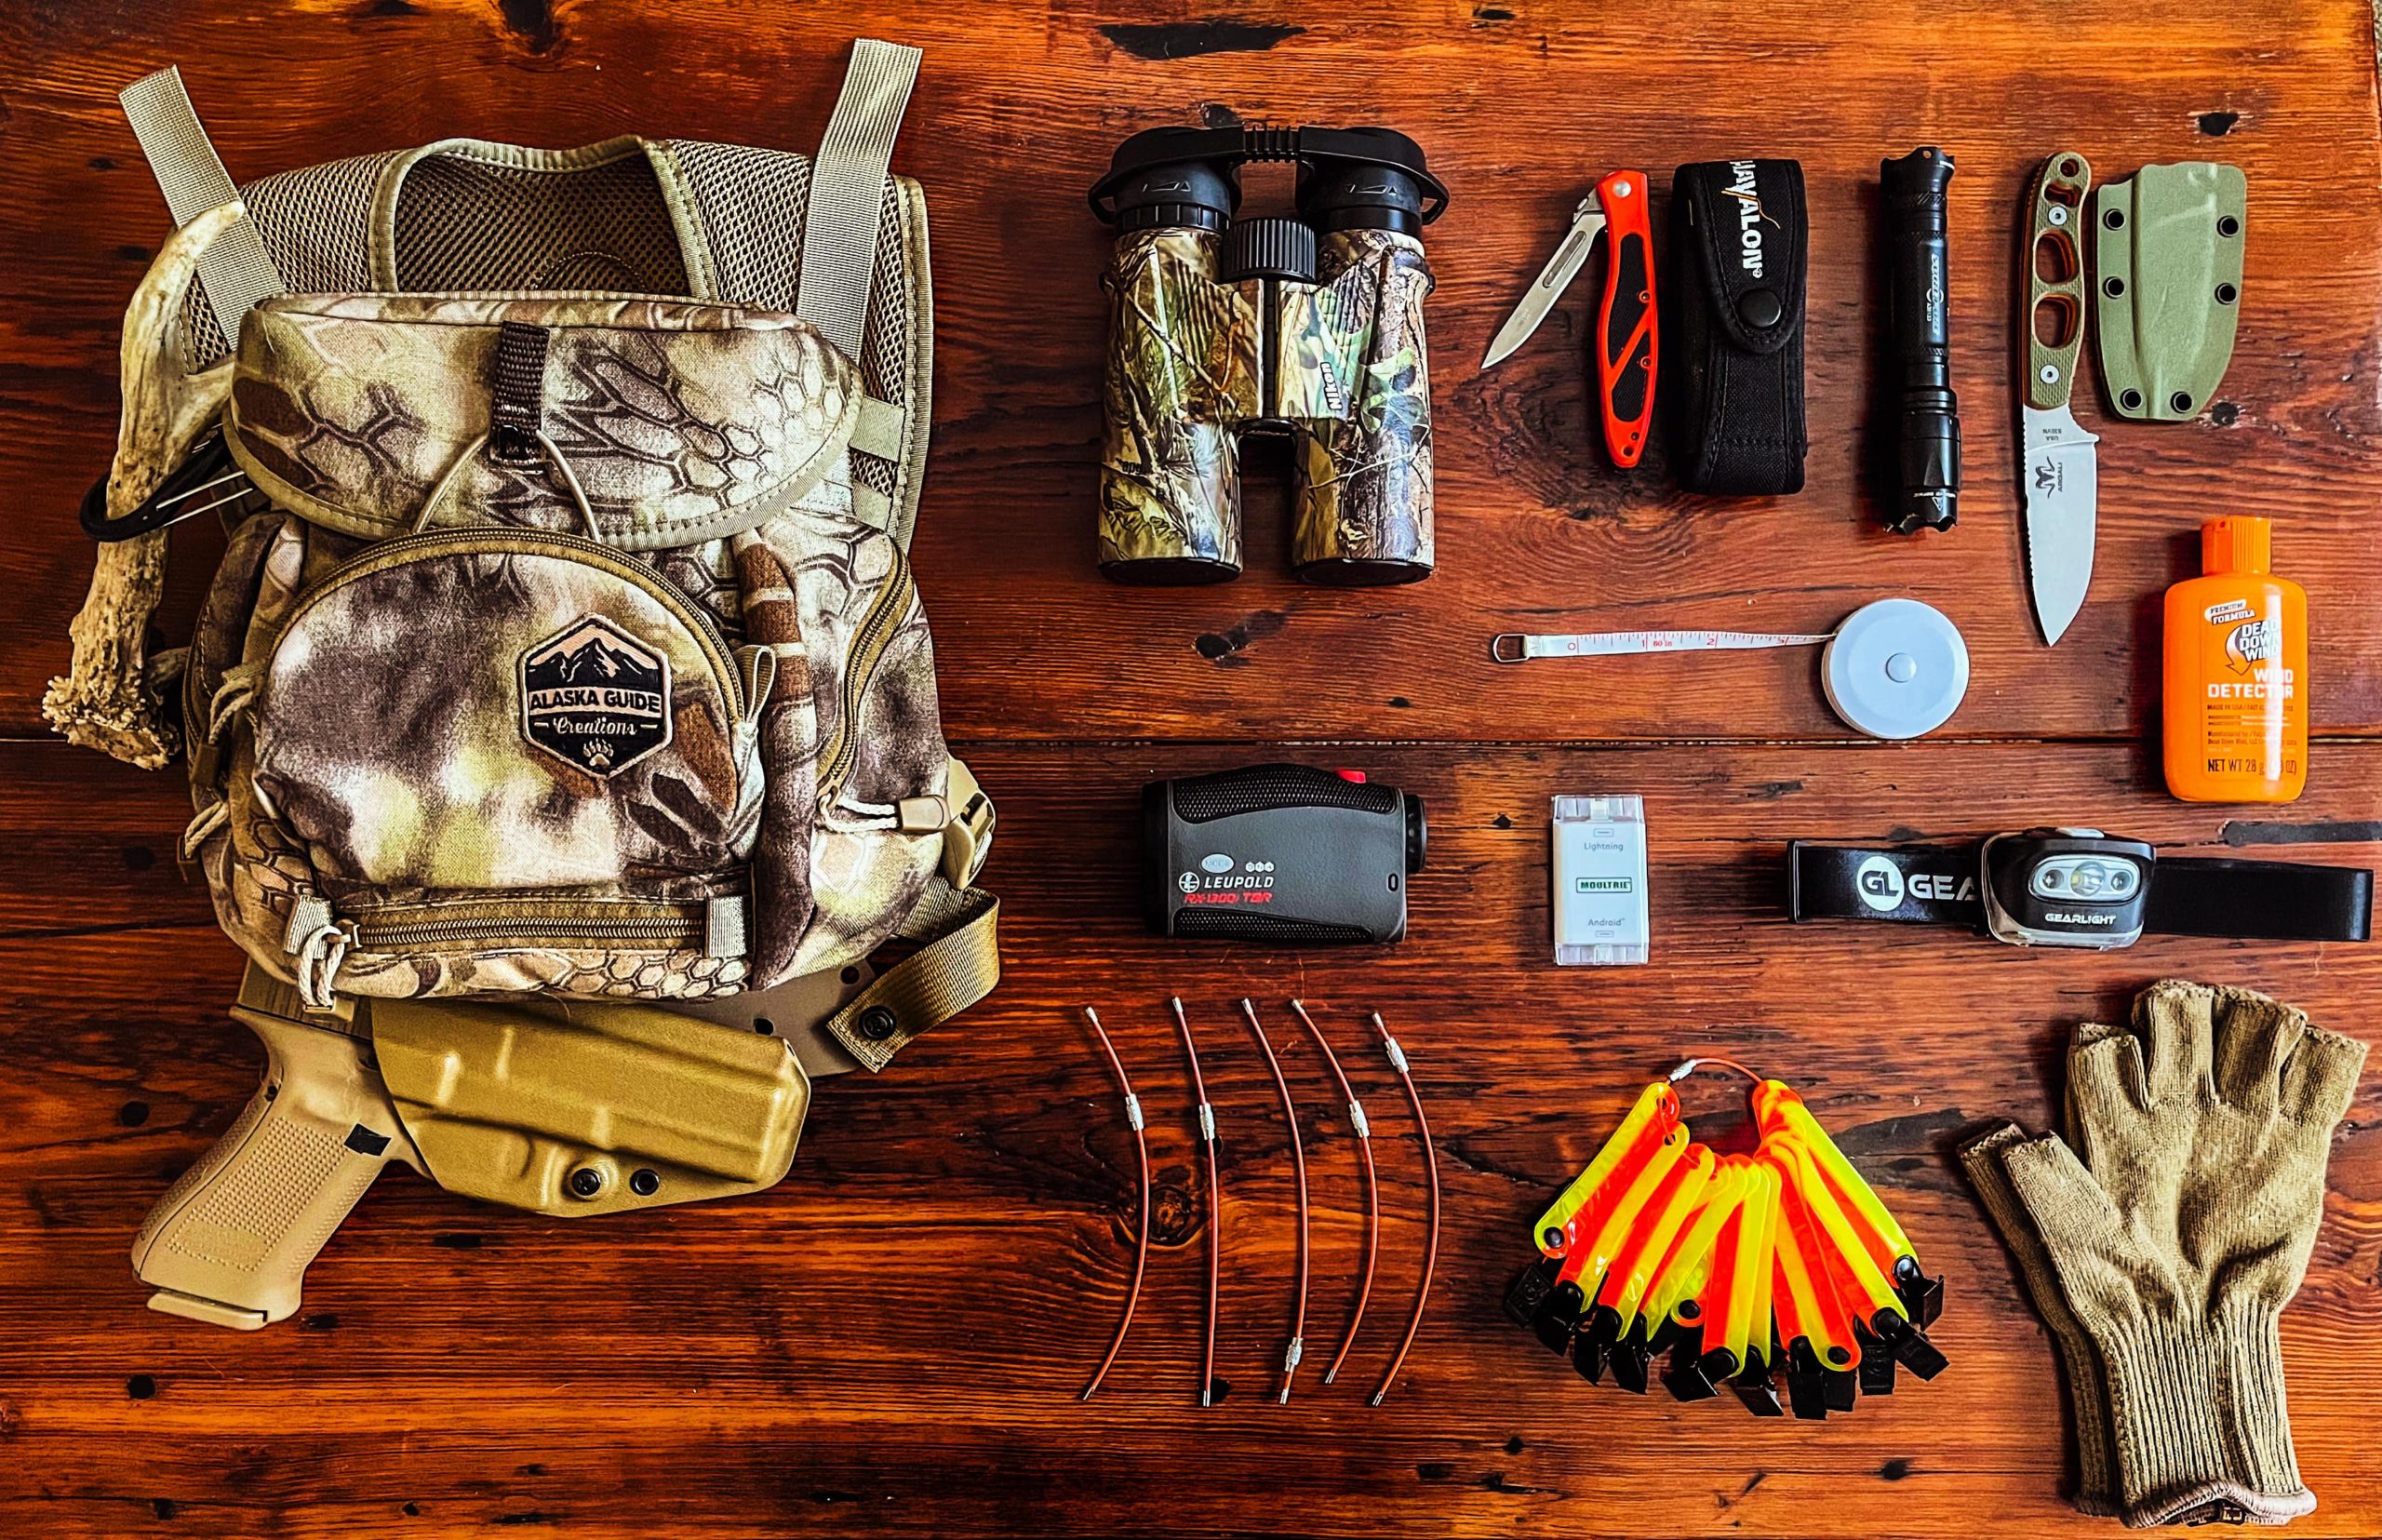 AGC Bino Pack - Review - Sportsman's Junction - Gear Reviews